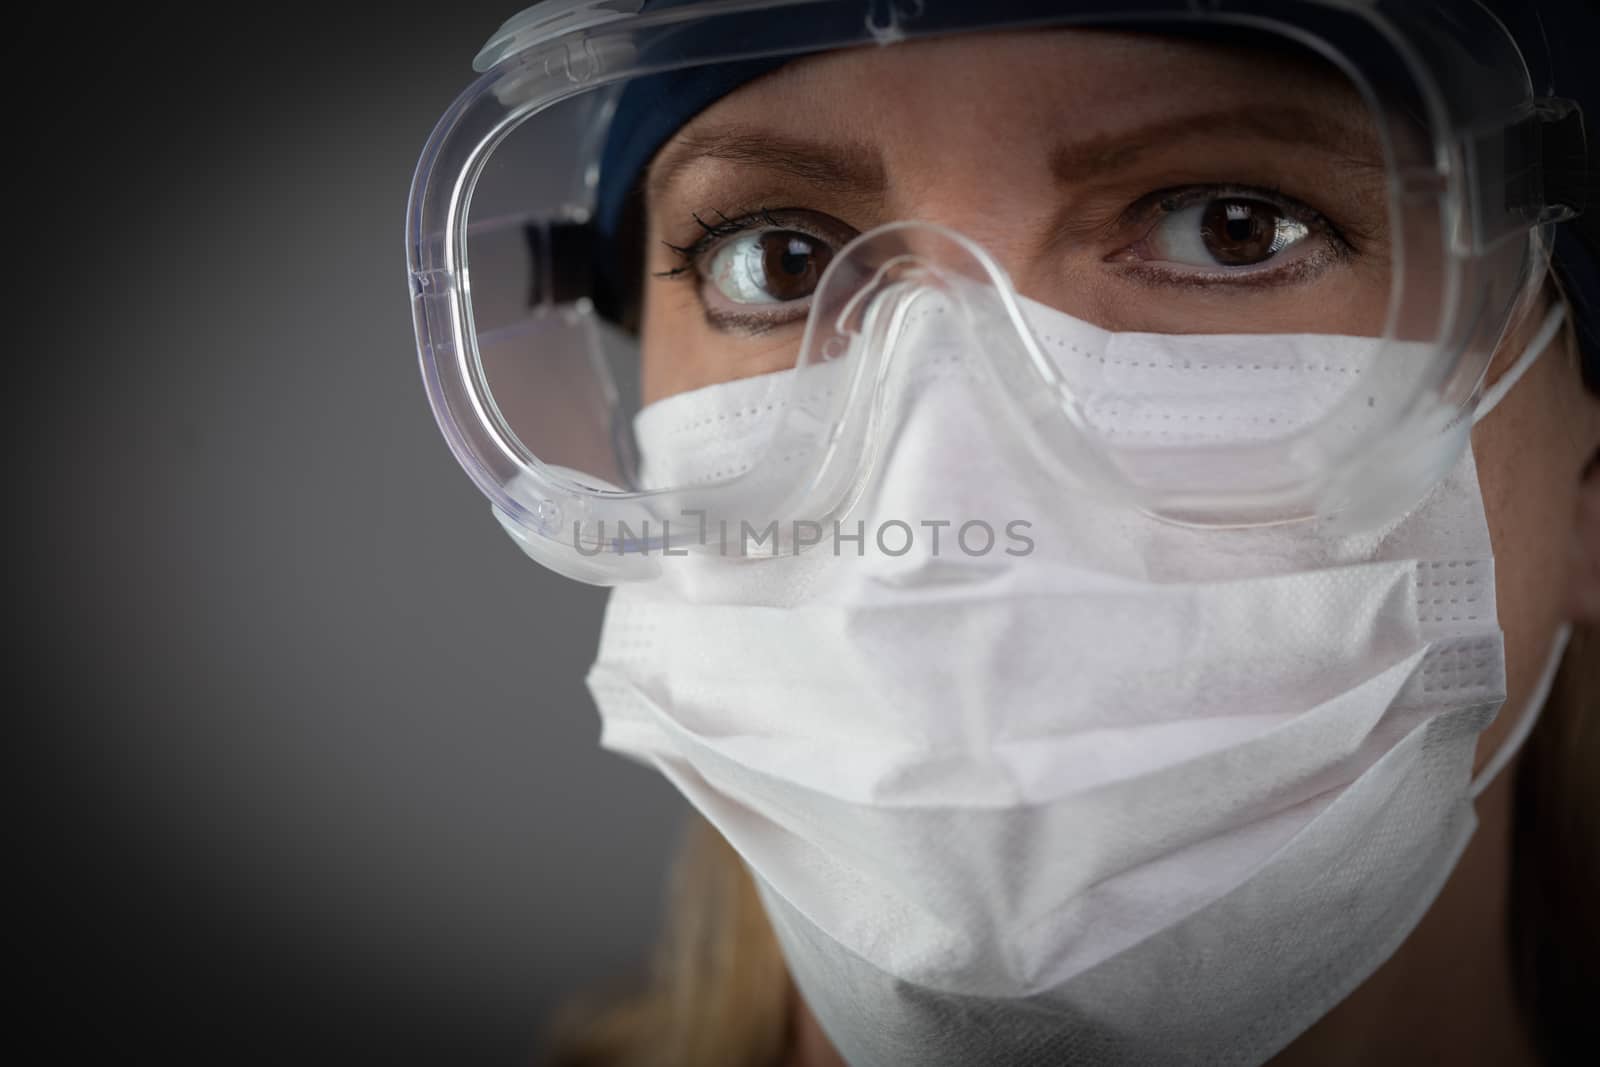 Female Medical Worker Wearing Protective Face Mask and Gear Against Dark Background.